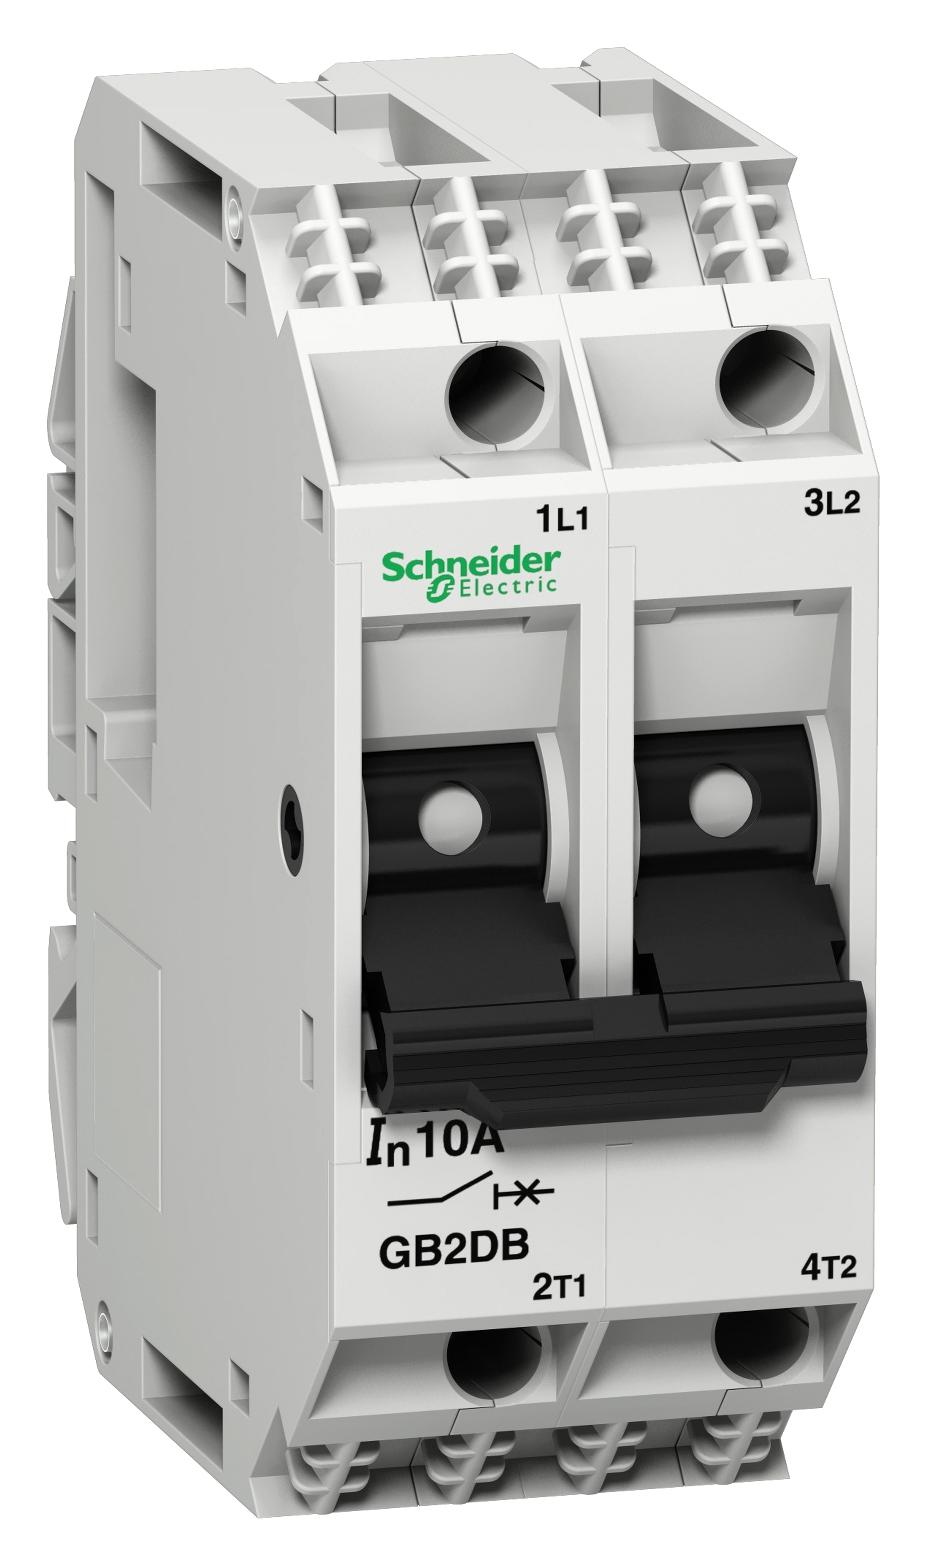 GB2DB09 THERMOMAGNETIC CKT BREAKER, 2P, 4A SCHNEIDER ELECTRIC